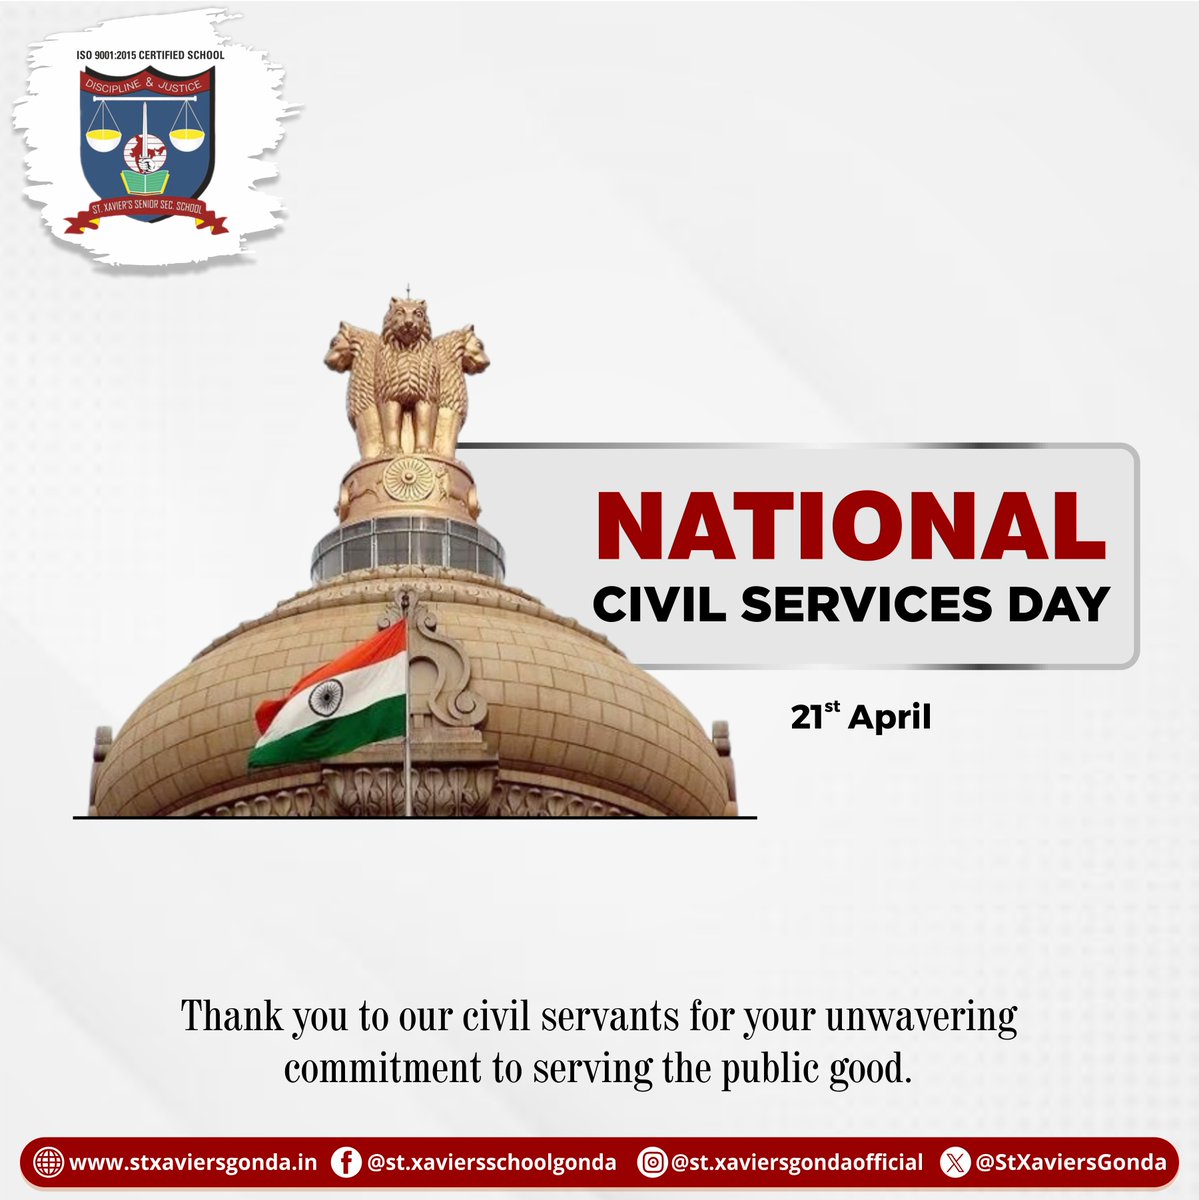 Today, we celebrate the unsung heroes who contribute to the welfare and progress of our nation. Happy National Civil Services Day!

#CivilServicesDay #CivilServants #PublicService #CivilServices #GovernmentOfficials #PublicServants #NationalCivilServicesDay